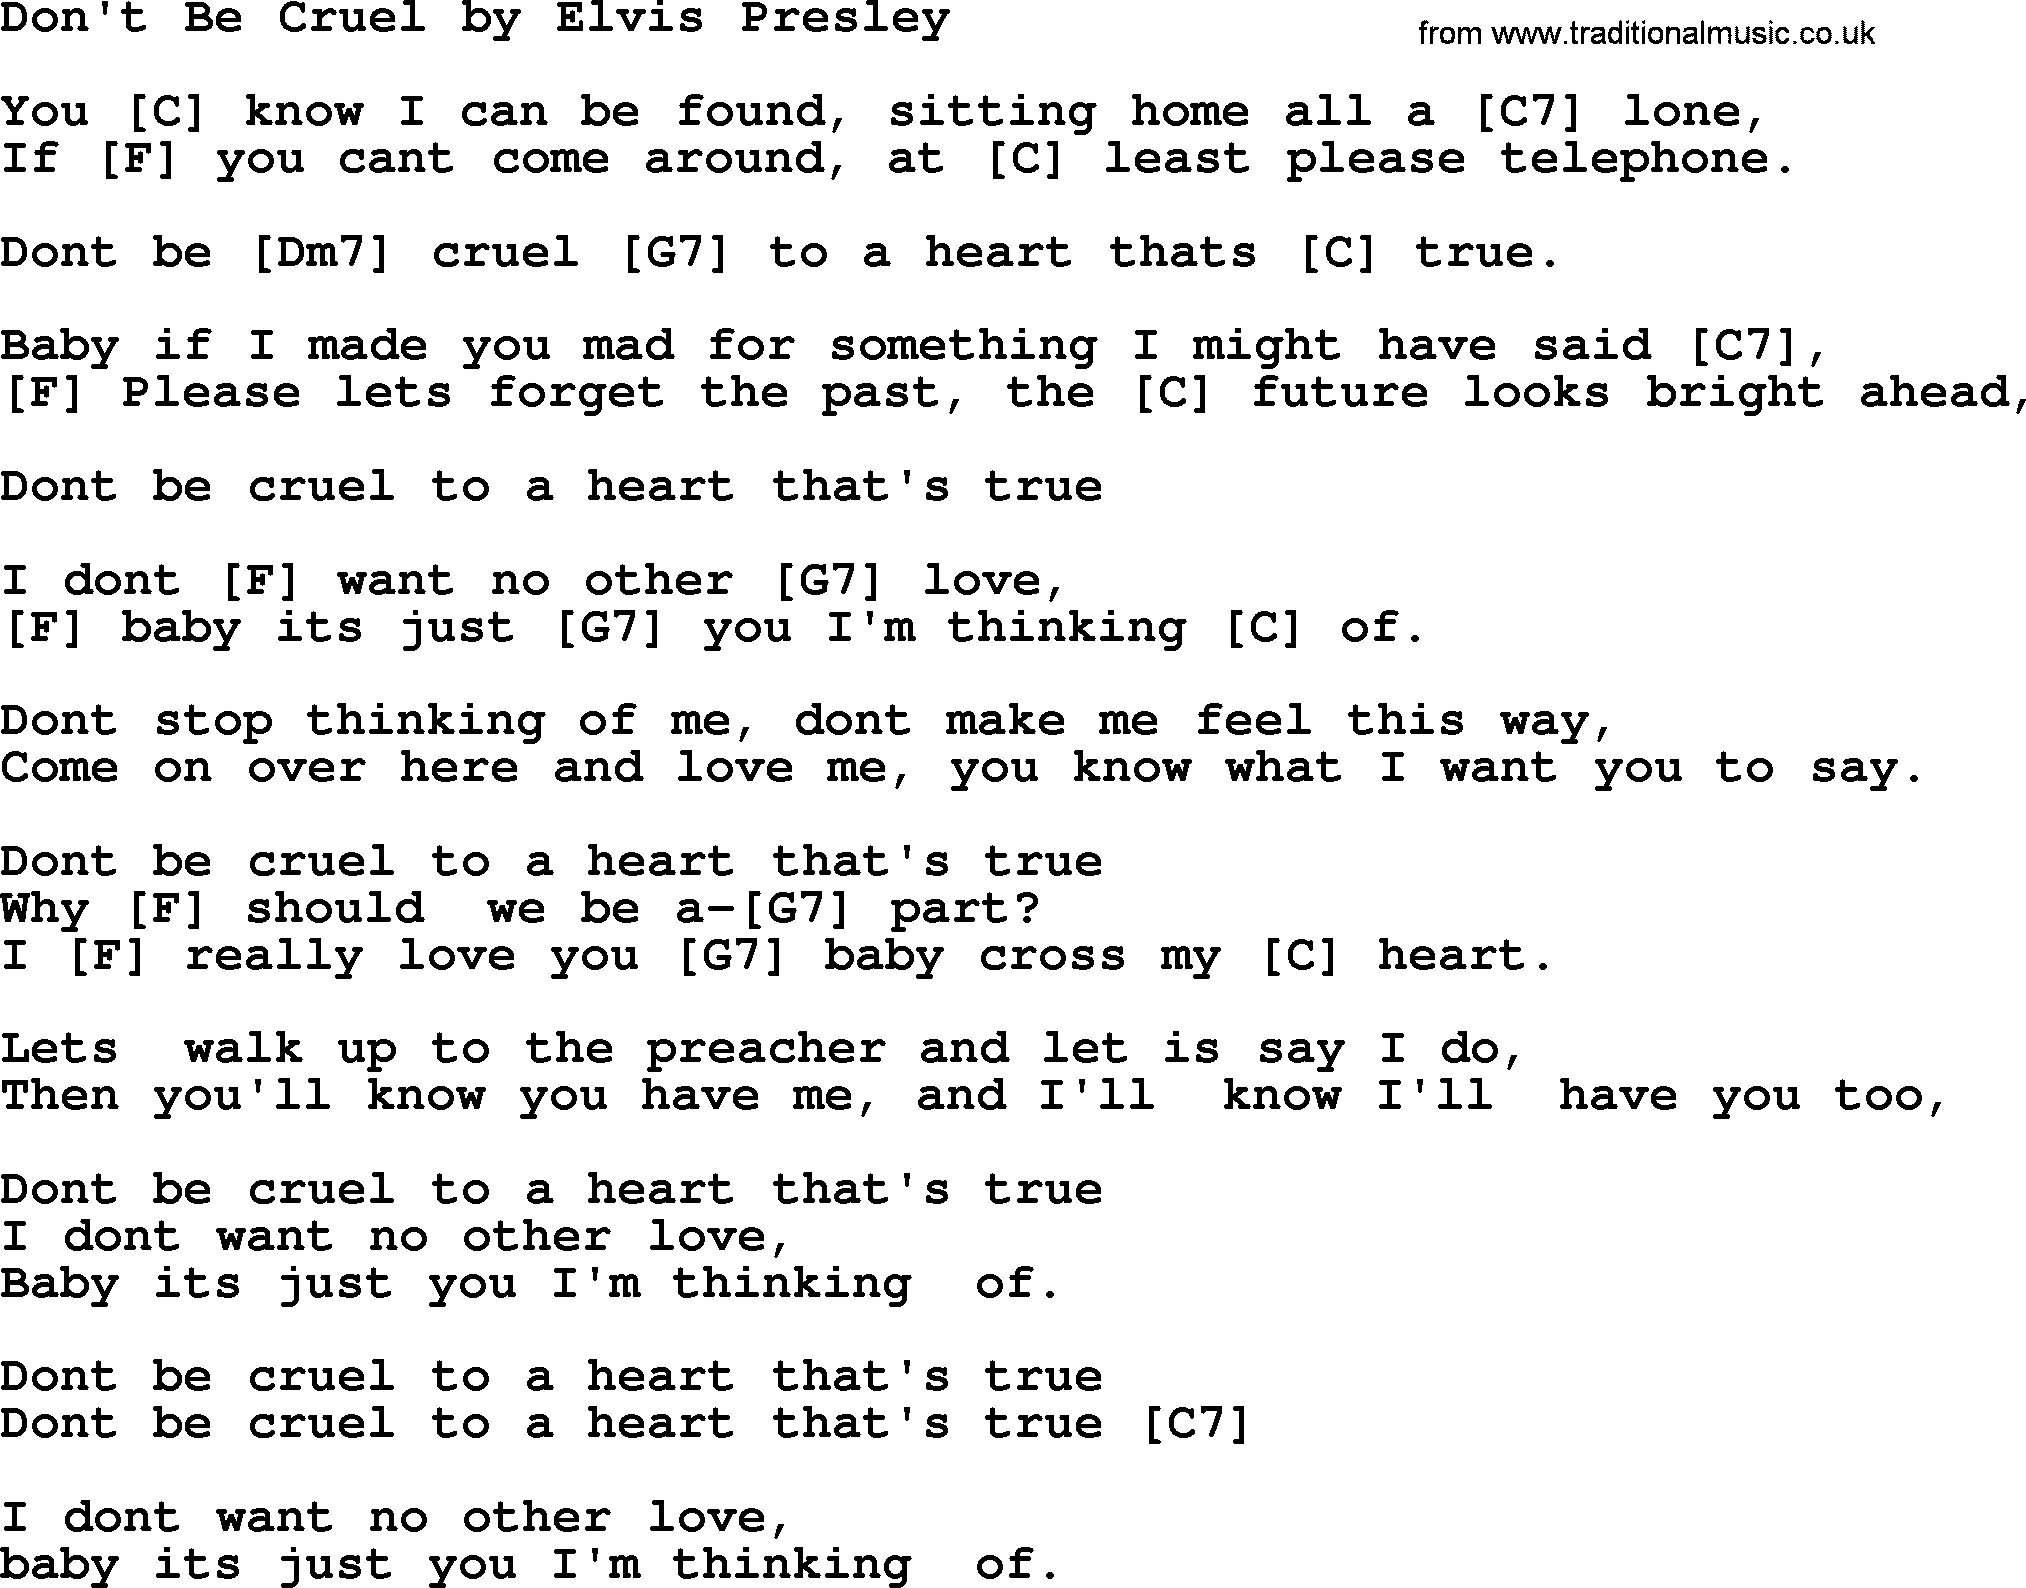 Elvis Presley song: Don't Be Cruel, lyrics and chords